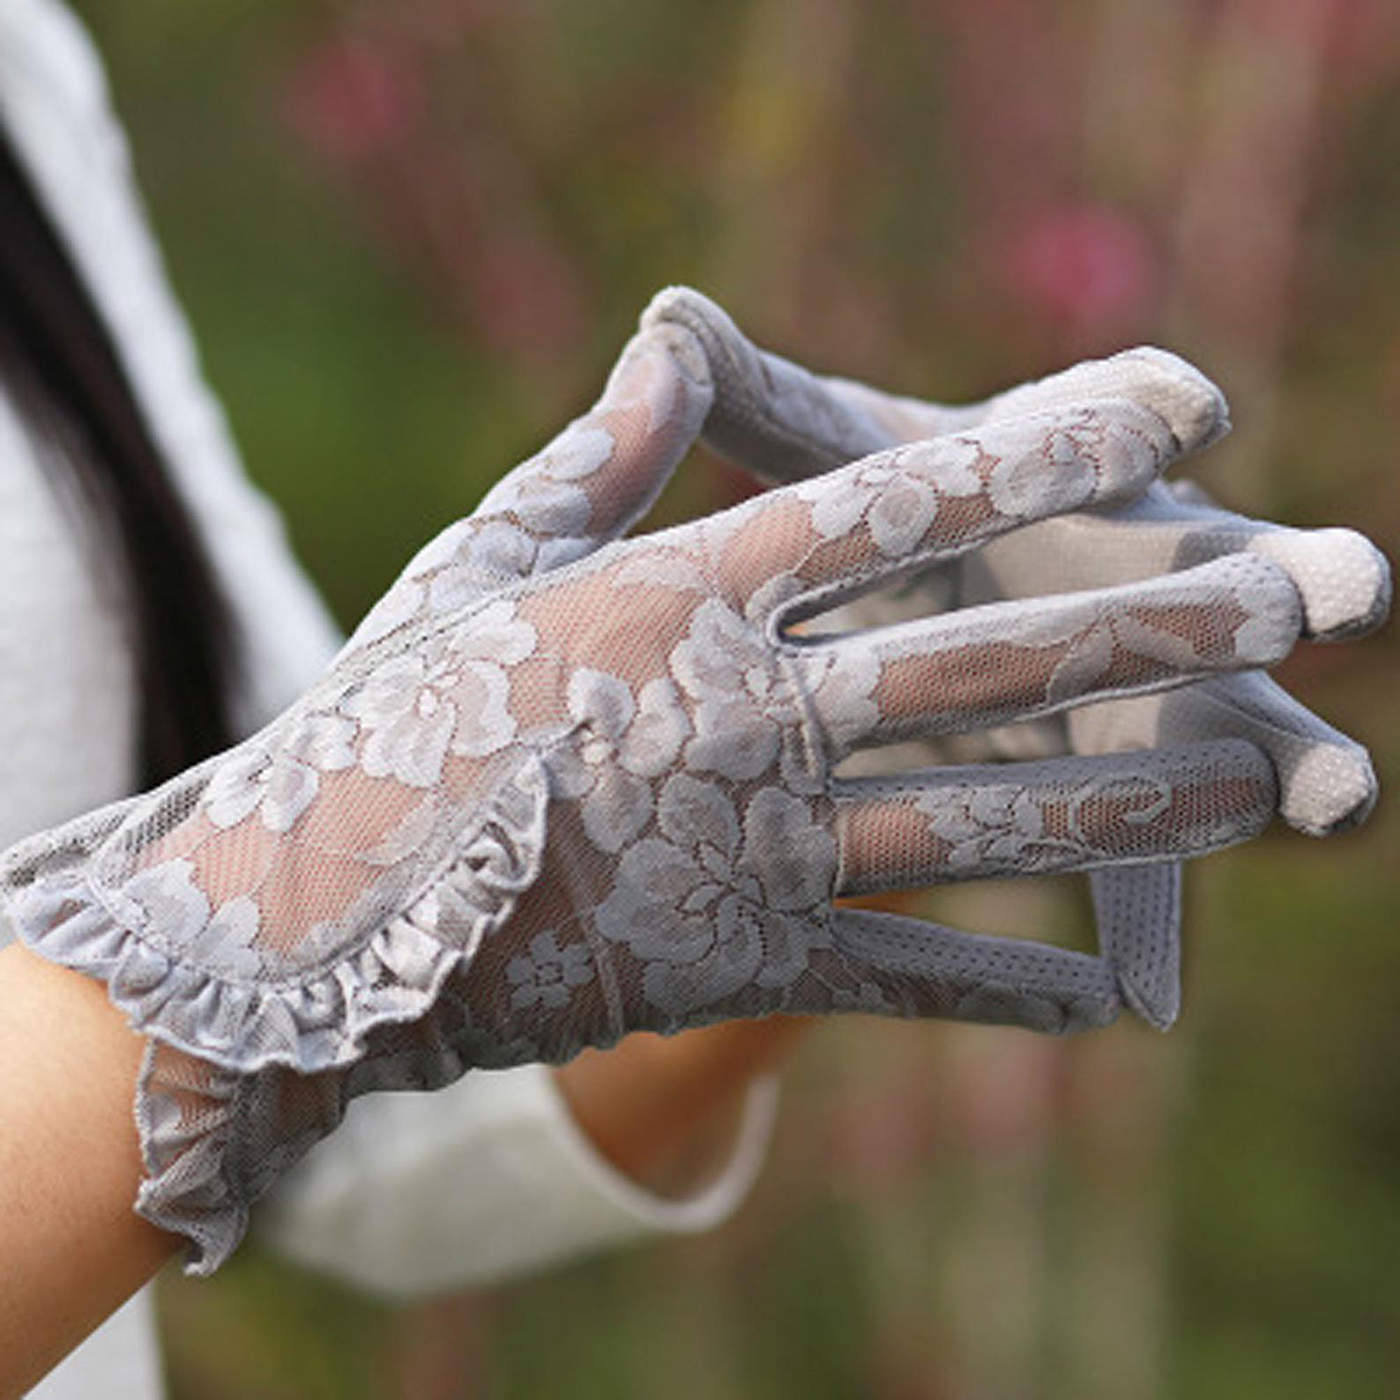 Short Lace Gloves inspired by Bridgerton